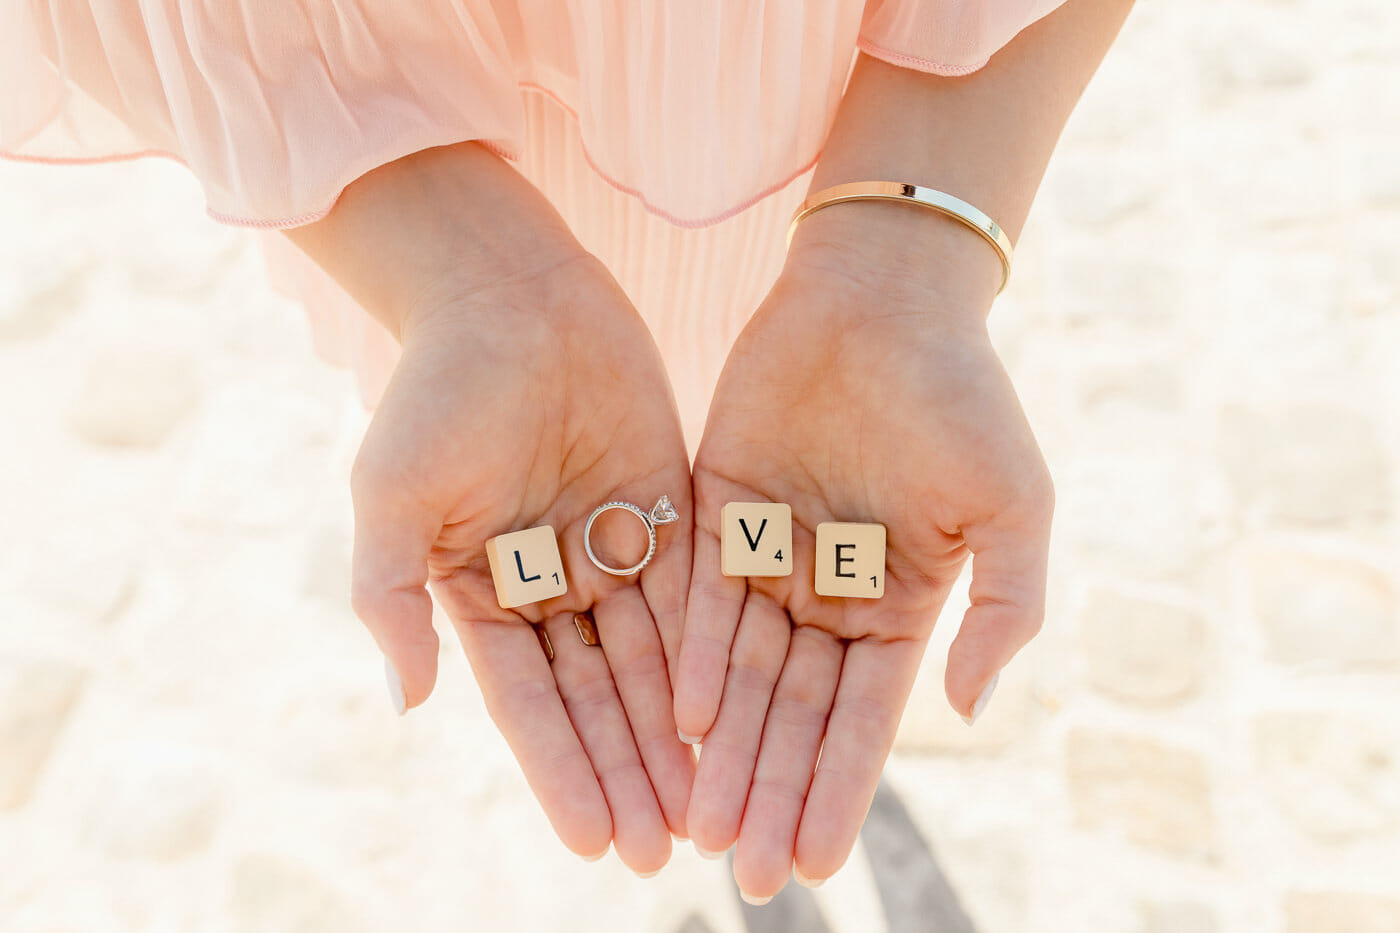 Creative engagement photos that show the diamond ring with LOVE